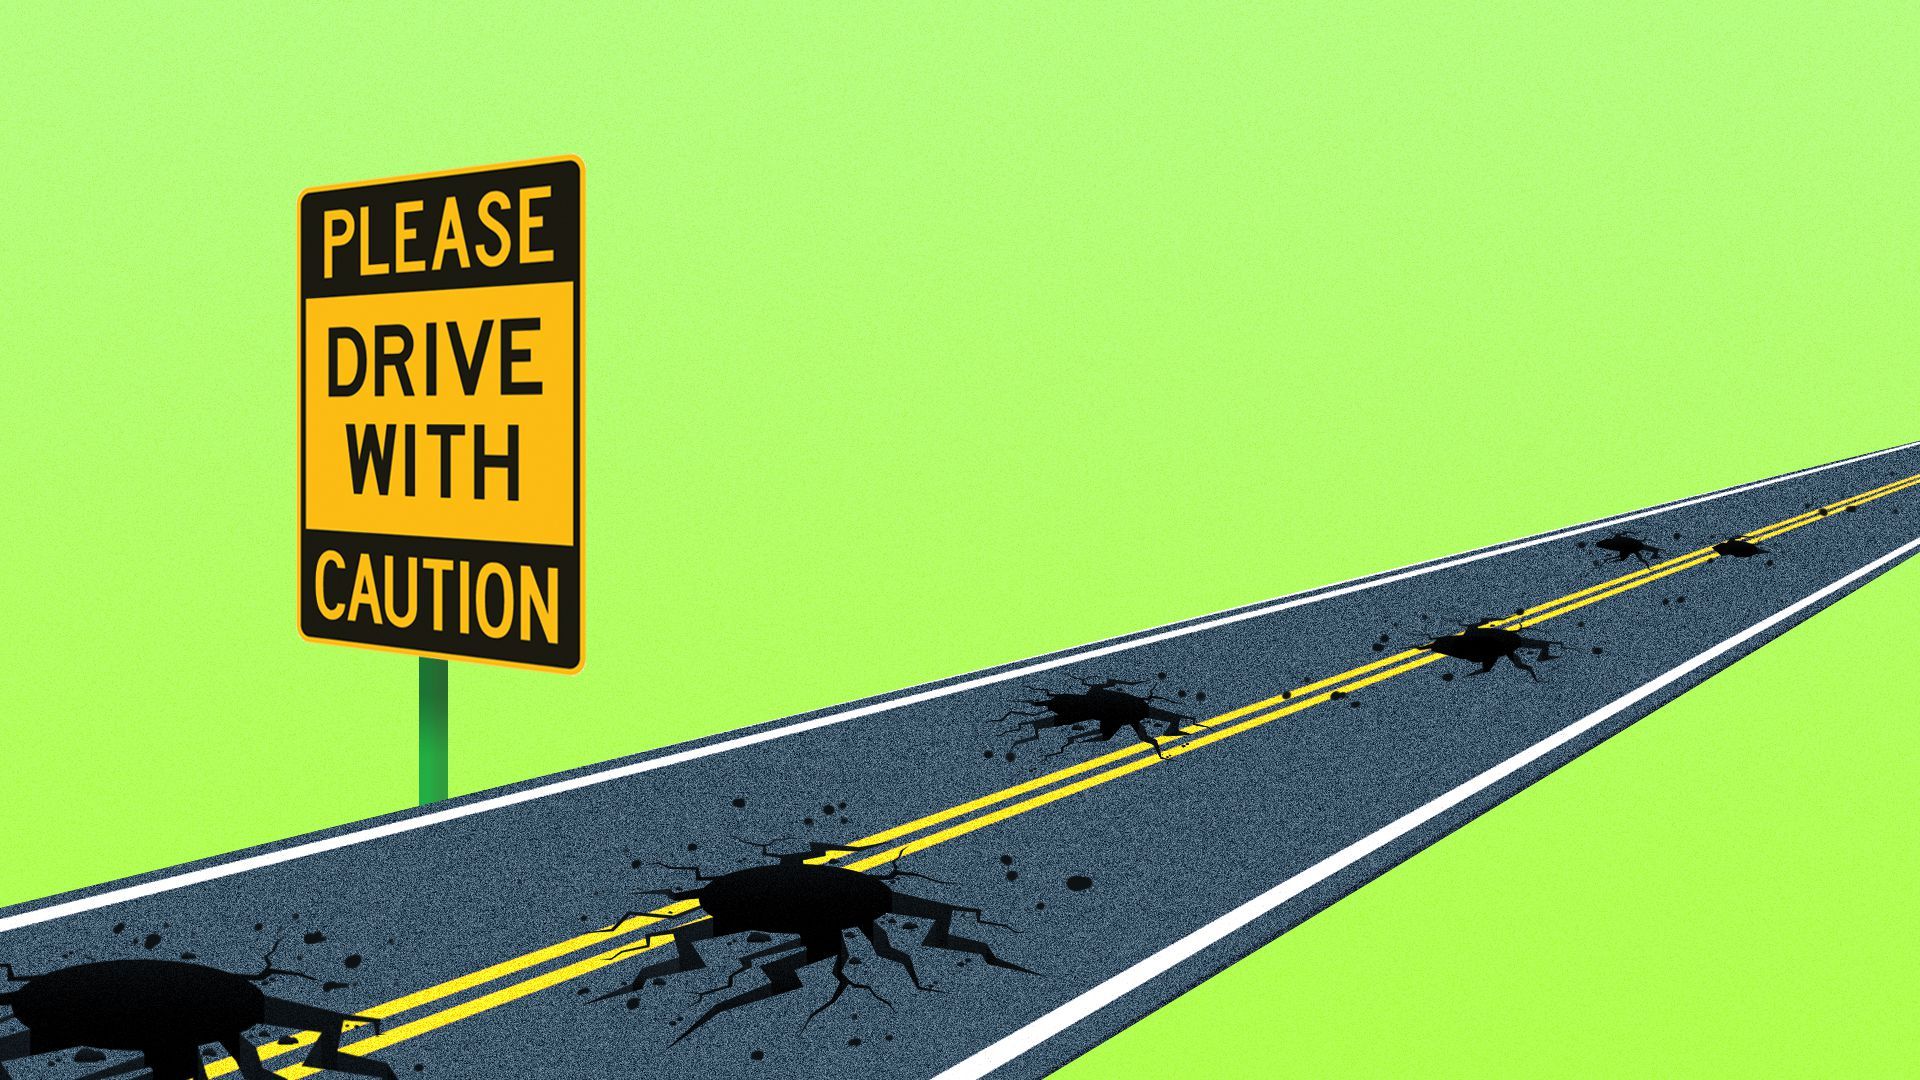 An illustration of a pothole-filled road with a "drive with caution" sign